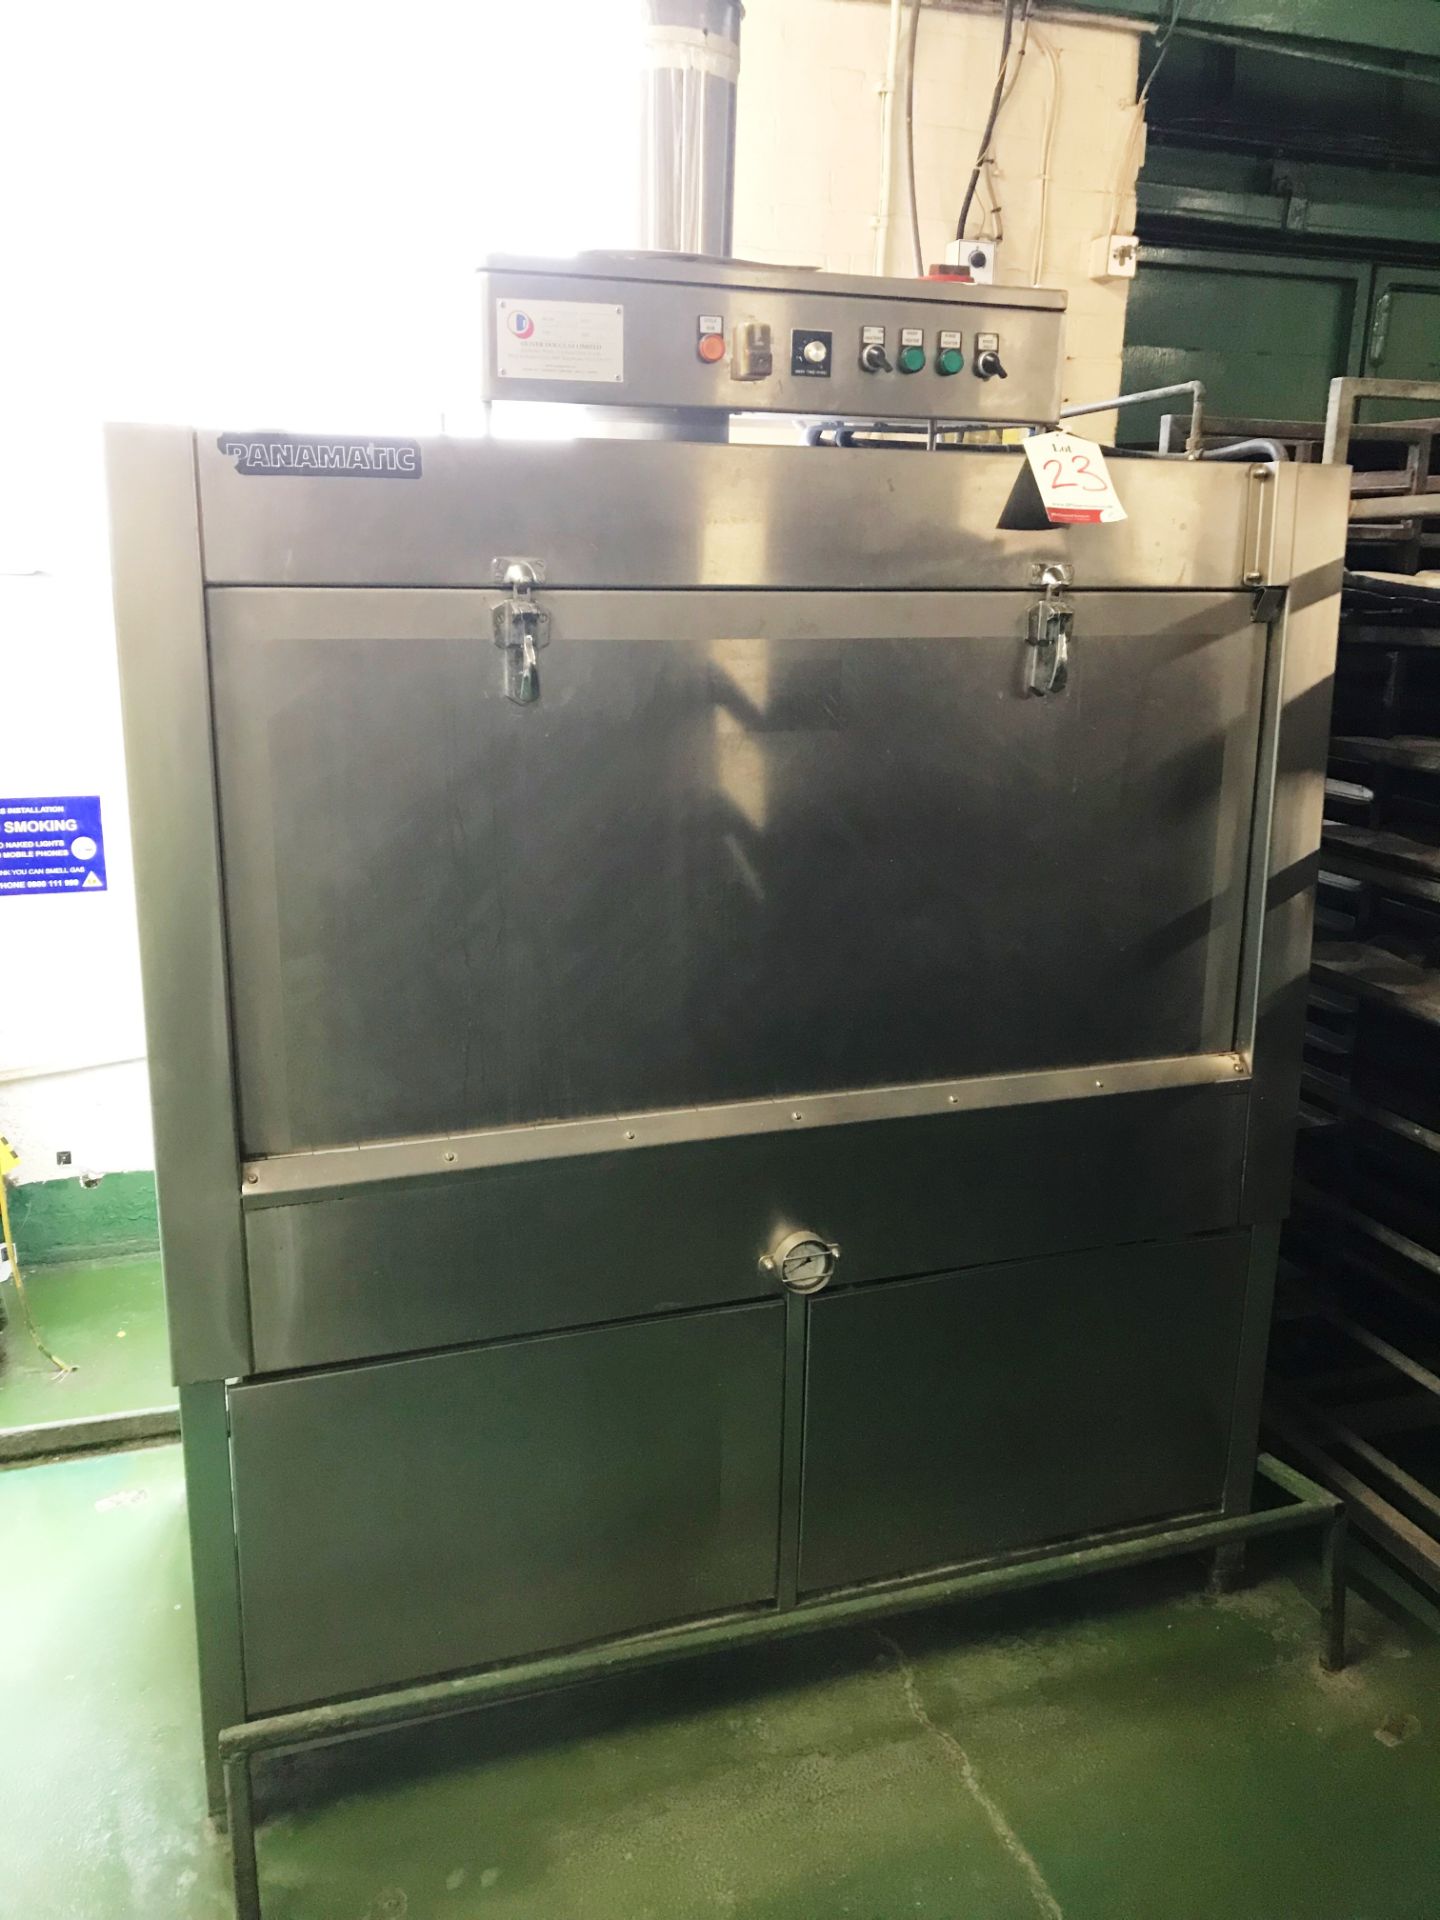 Oliver Douglas Panamatic 700 Industrial Washer